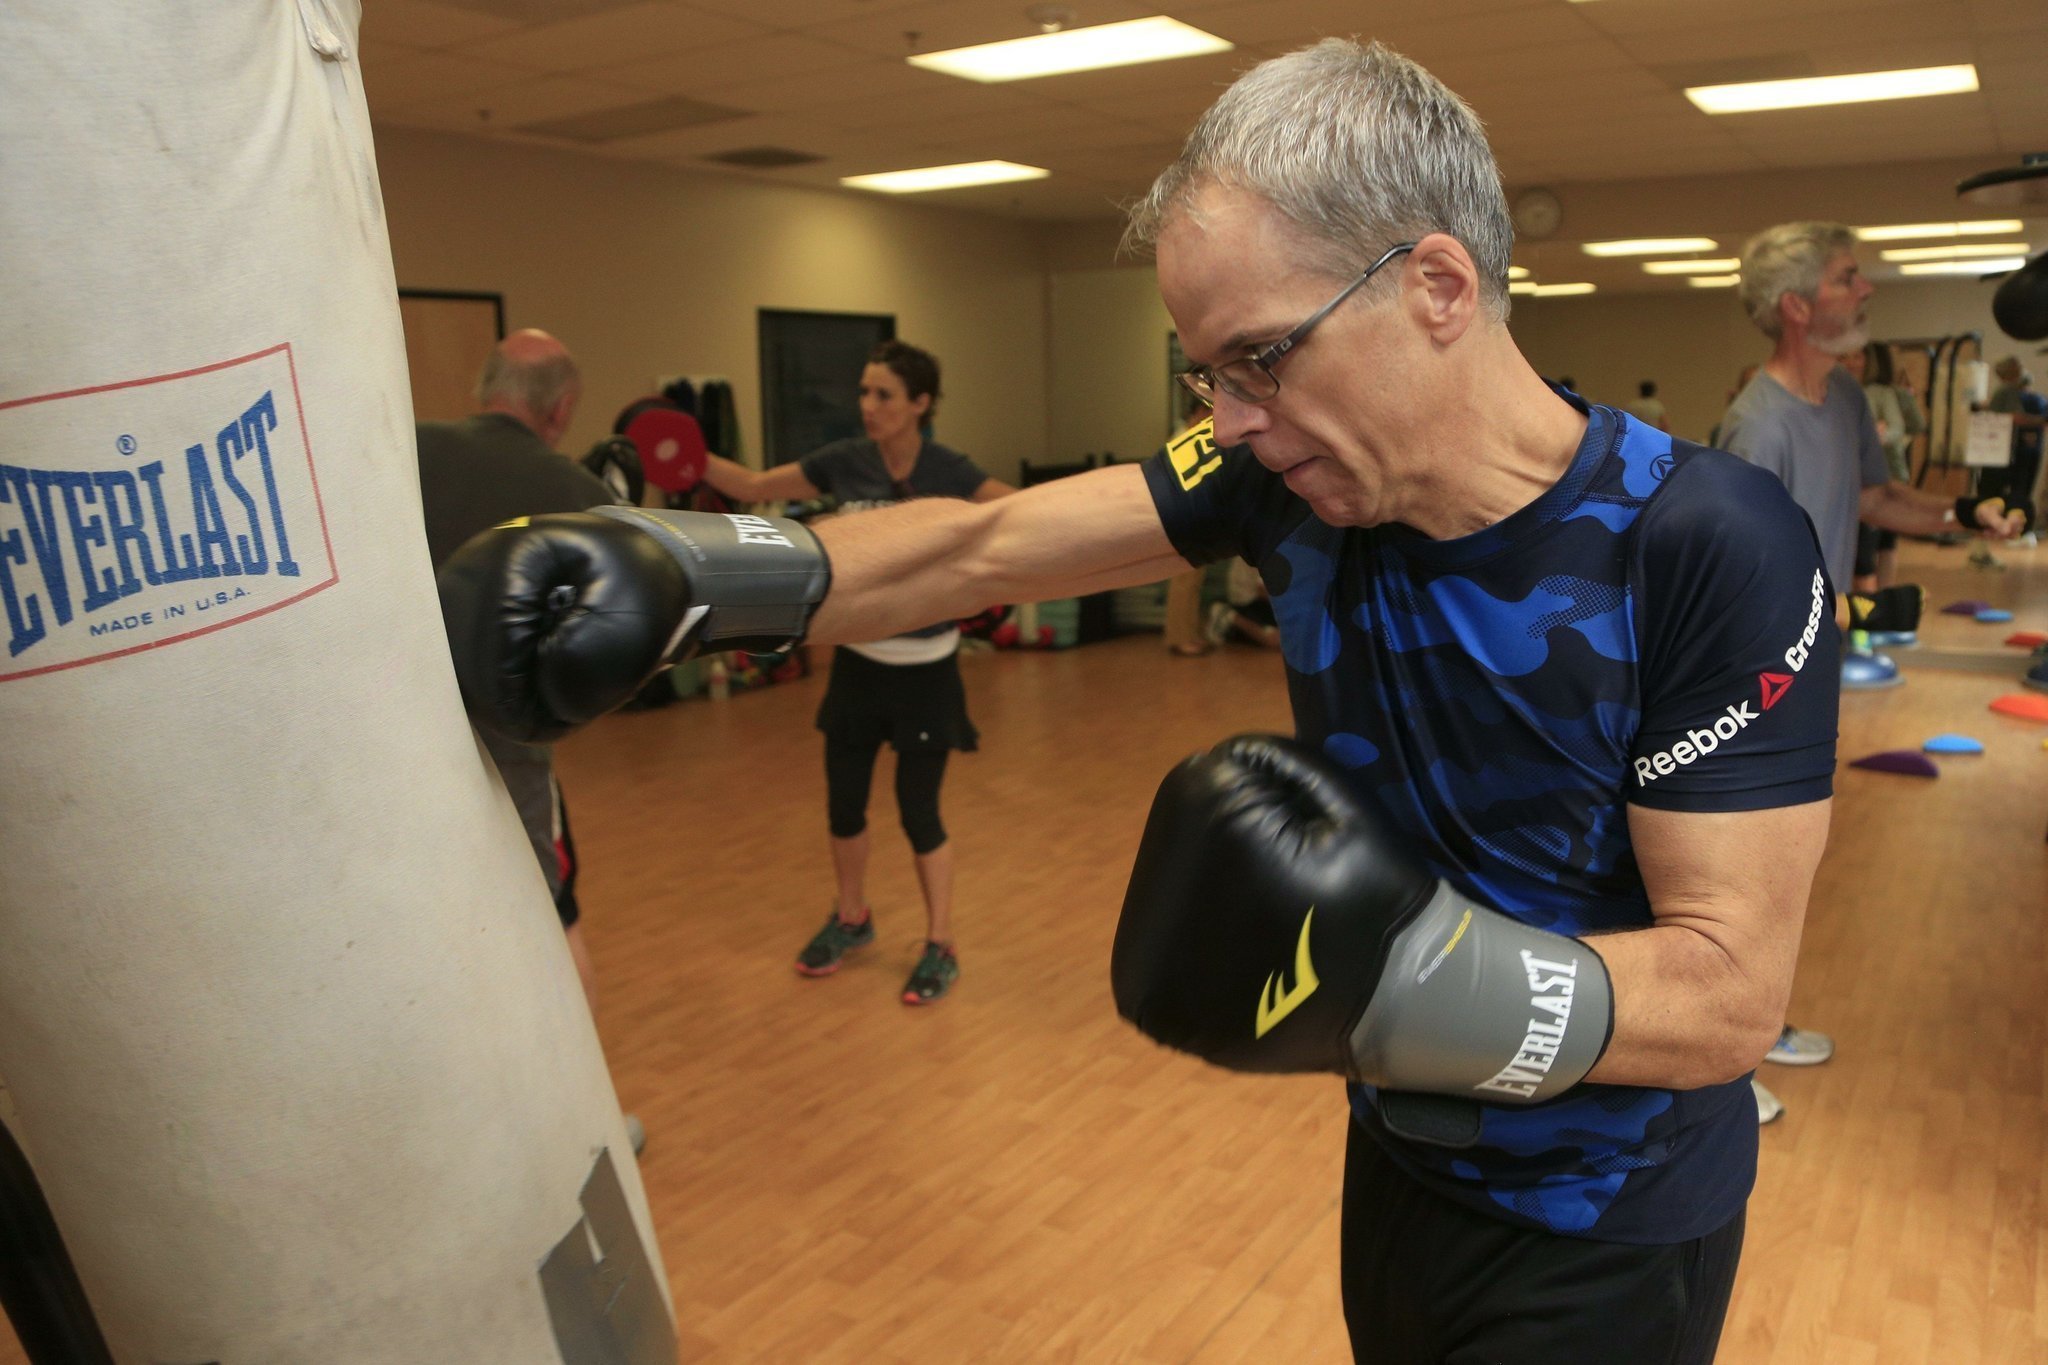 Boxing class stops Parkinson’s in its tracks - The San Diego Union-Tribune